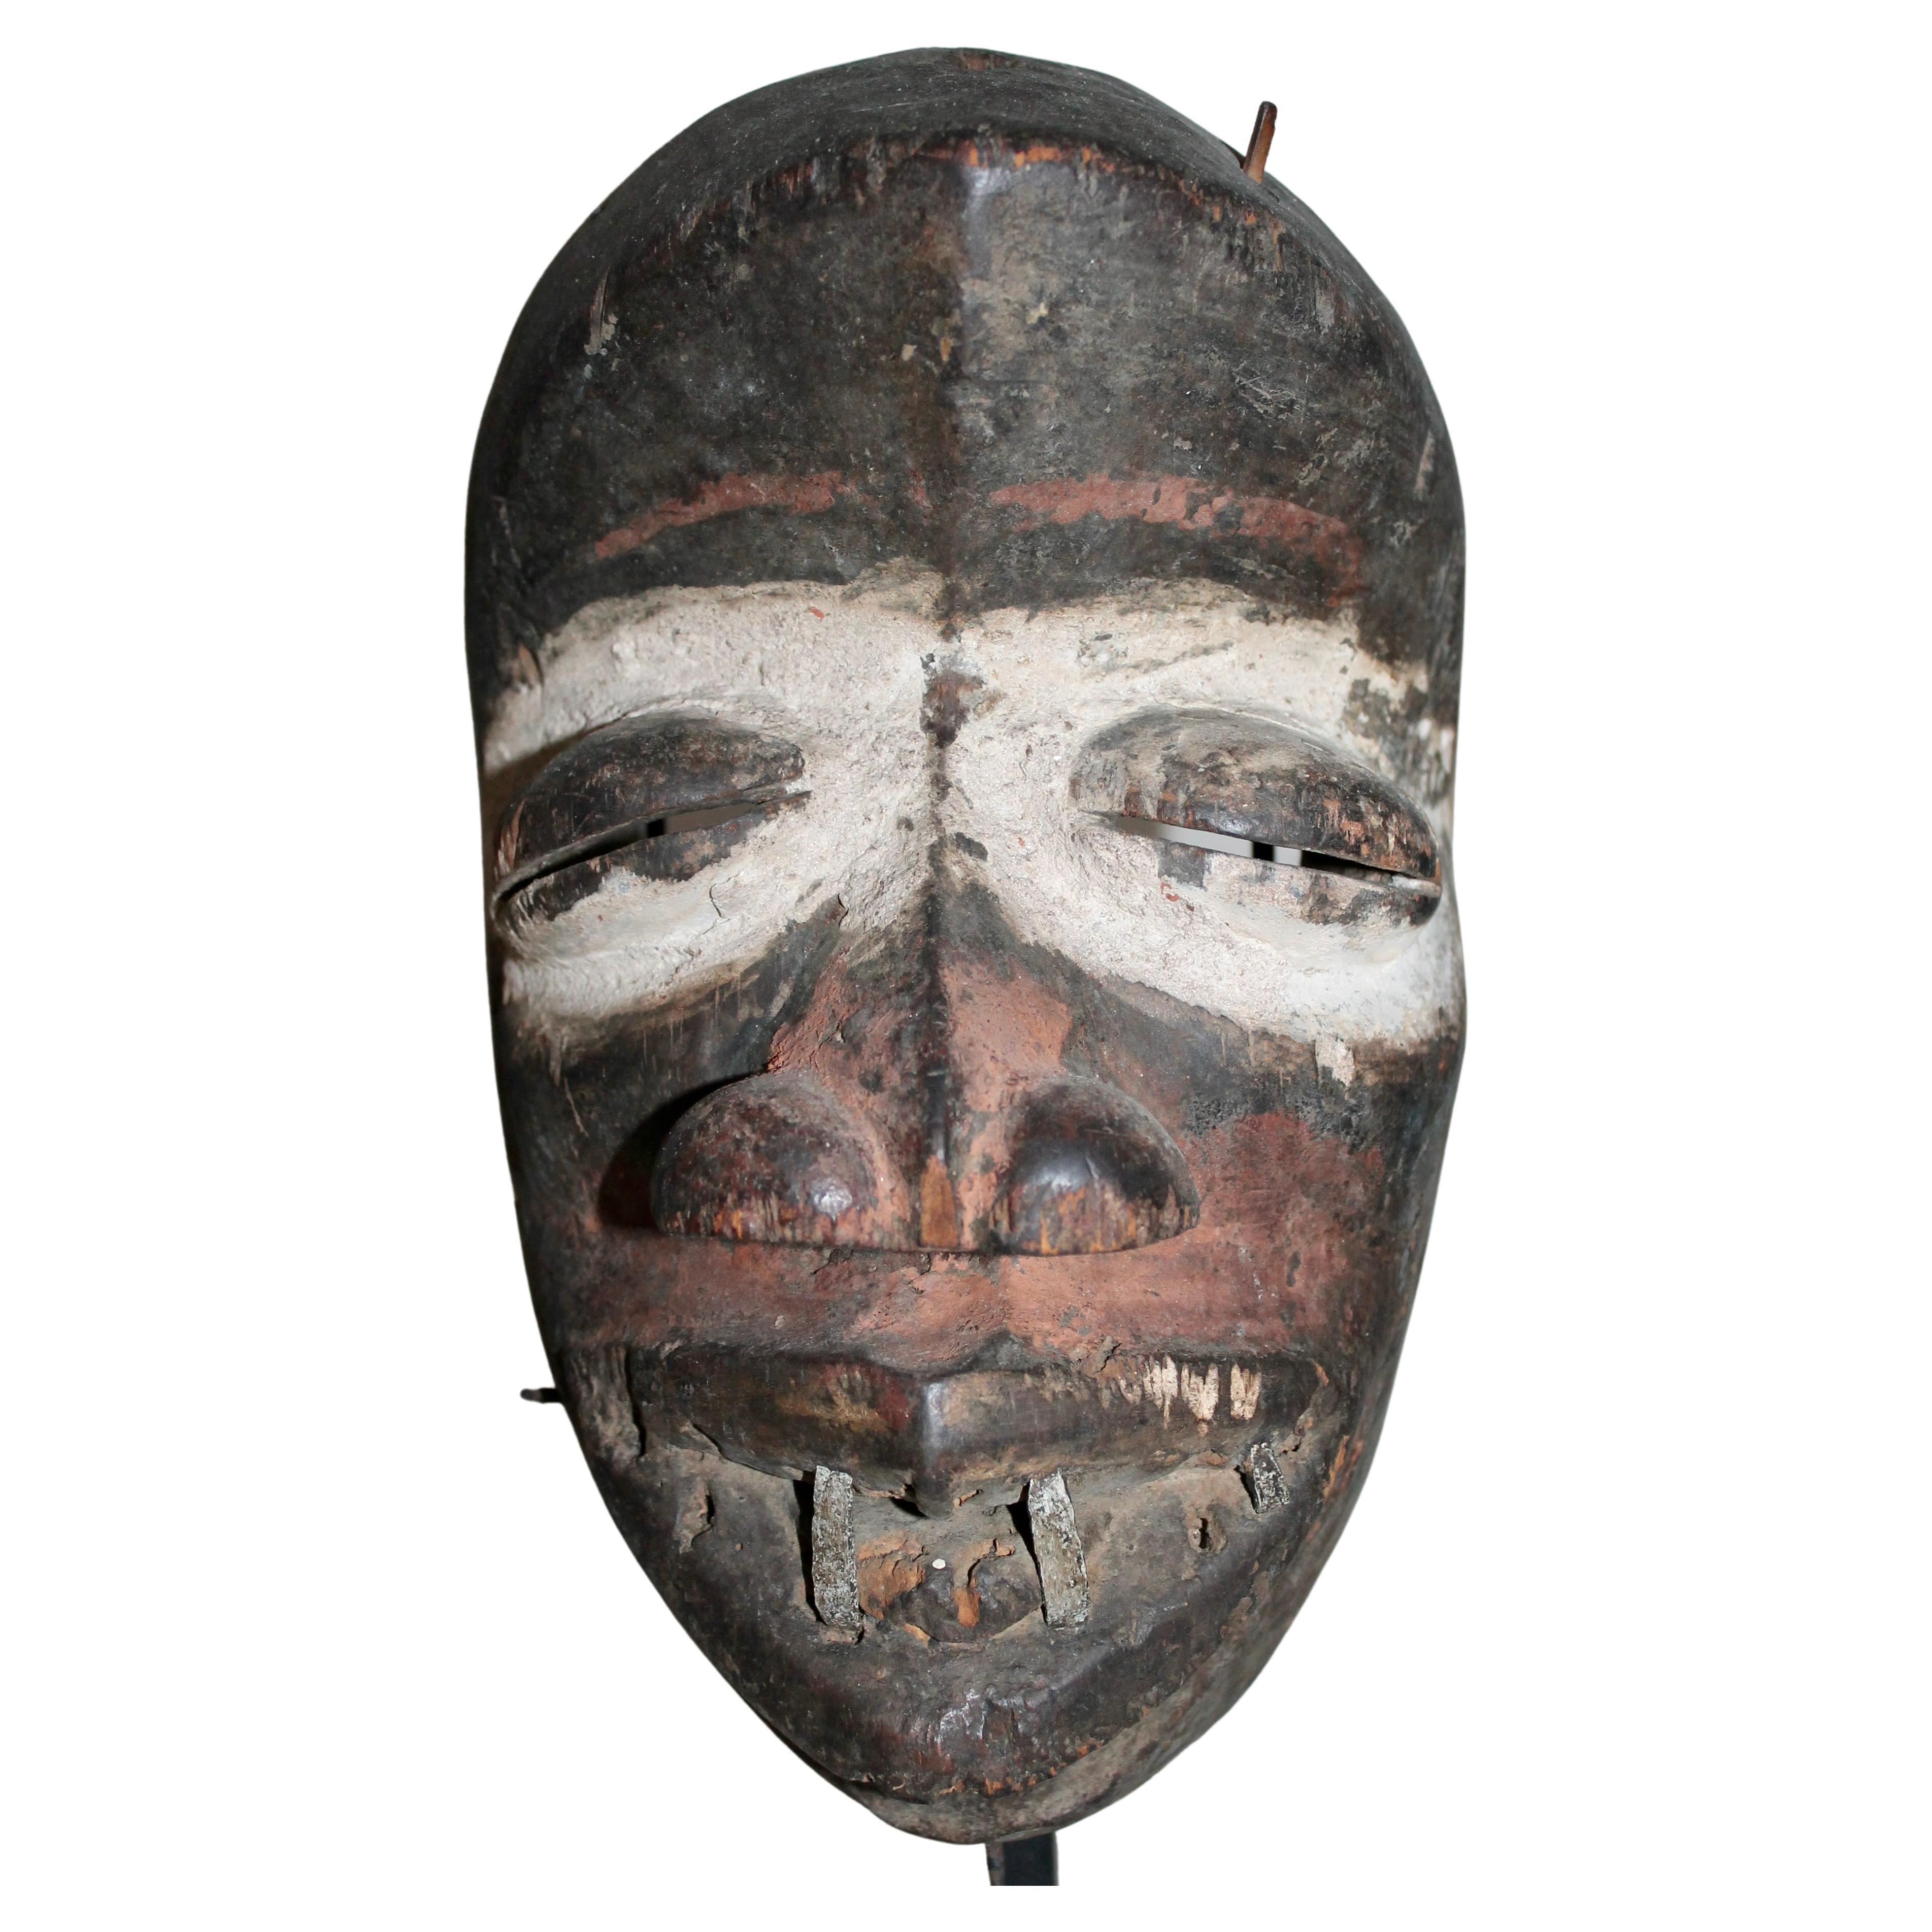 Superb mask with typical strong features and kaolin around the eyes. Advertised by Pace Primitive in Arts D'Afrique Noire 74. Ex. collection Al Ross (1911-2011).